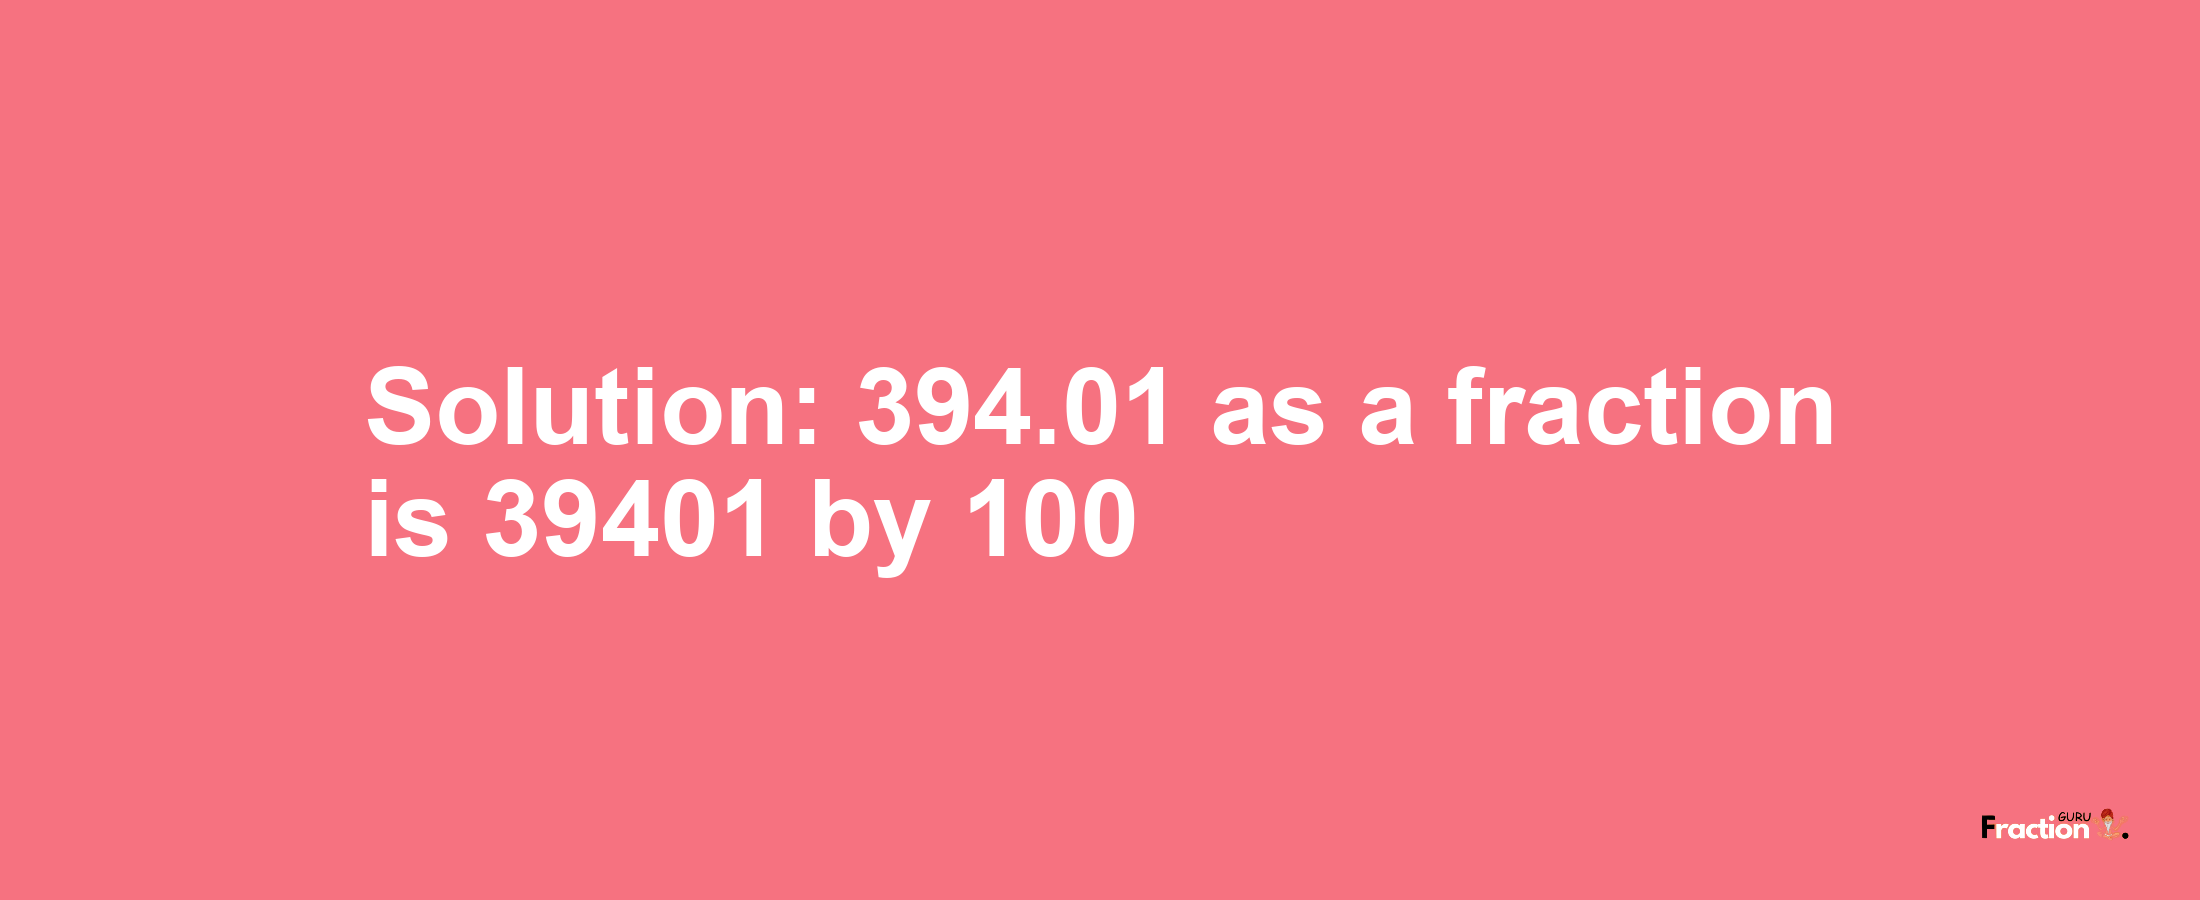 Solution:394.01 as a fraction is 39401/100